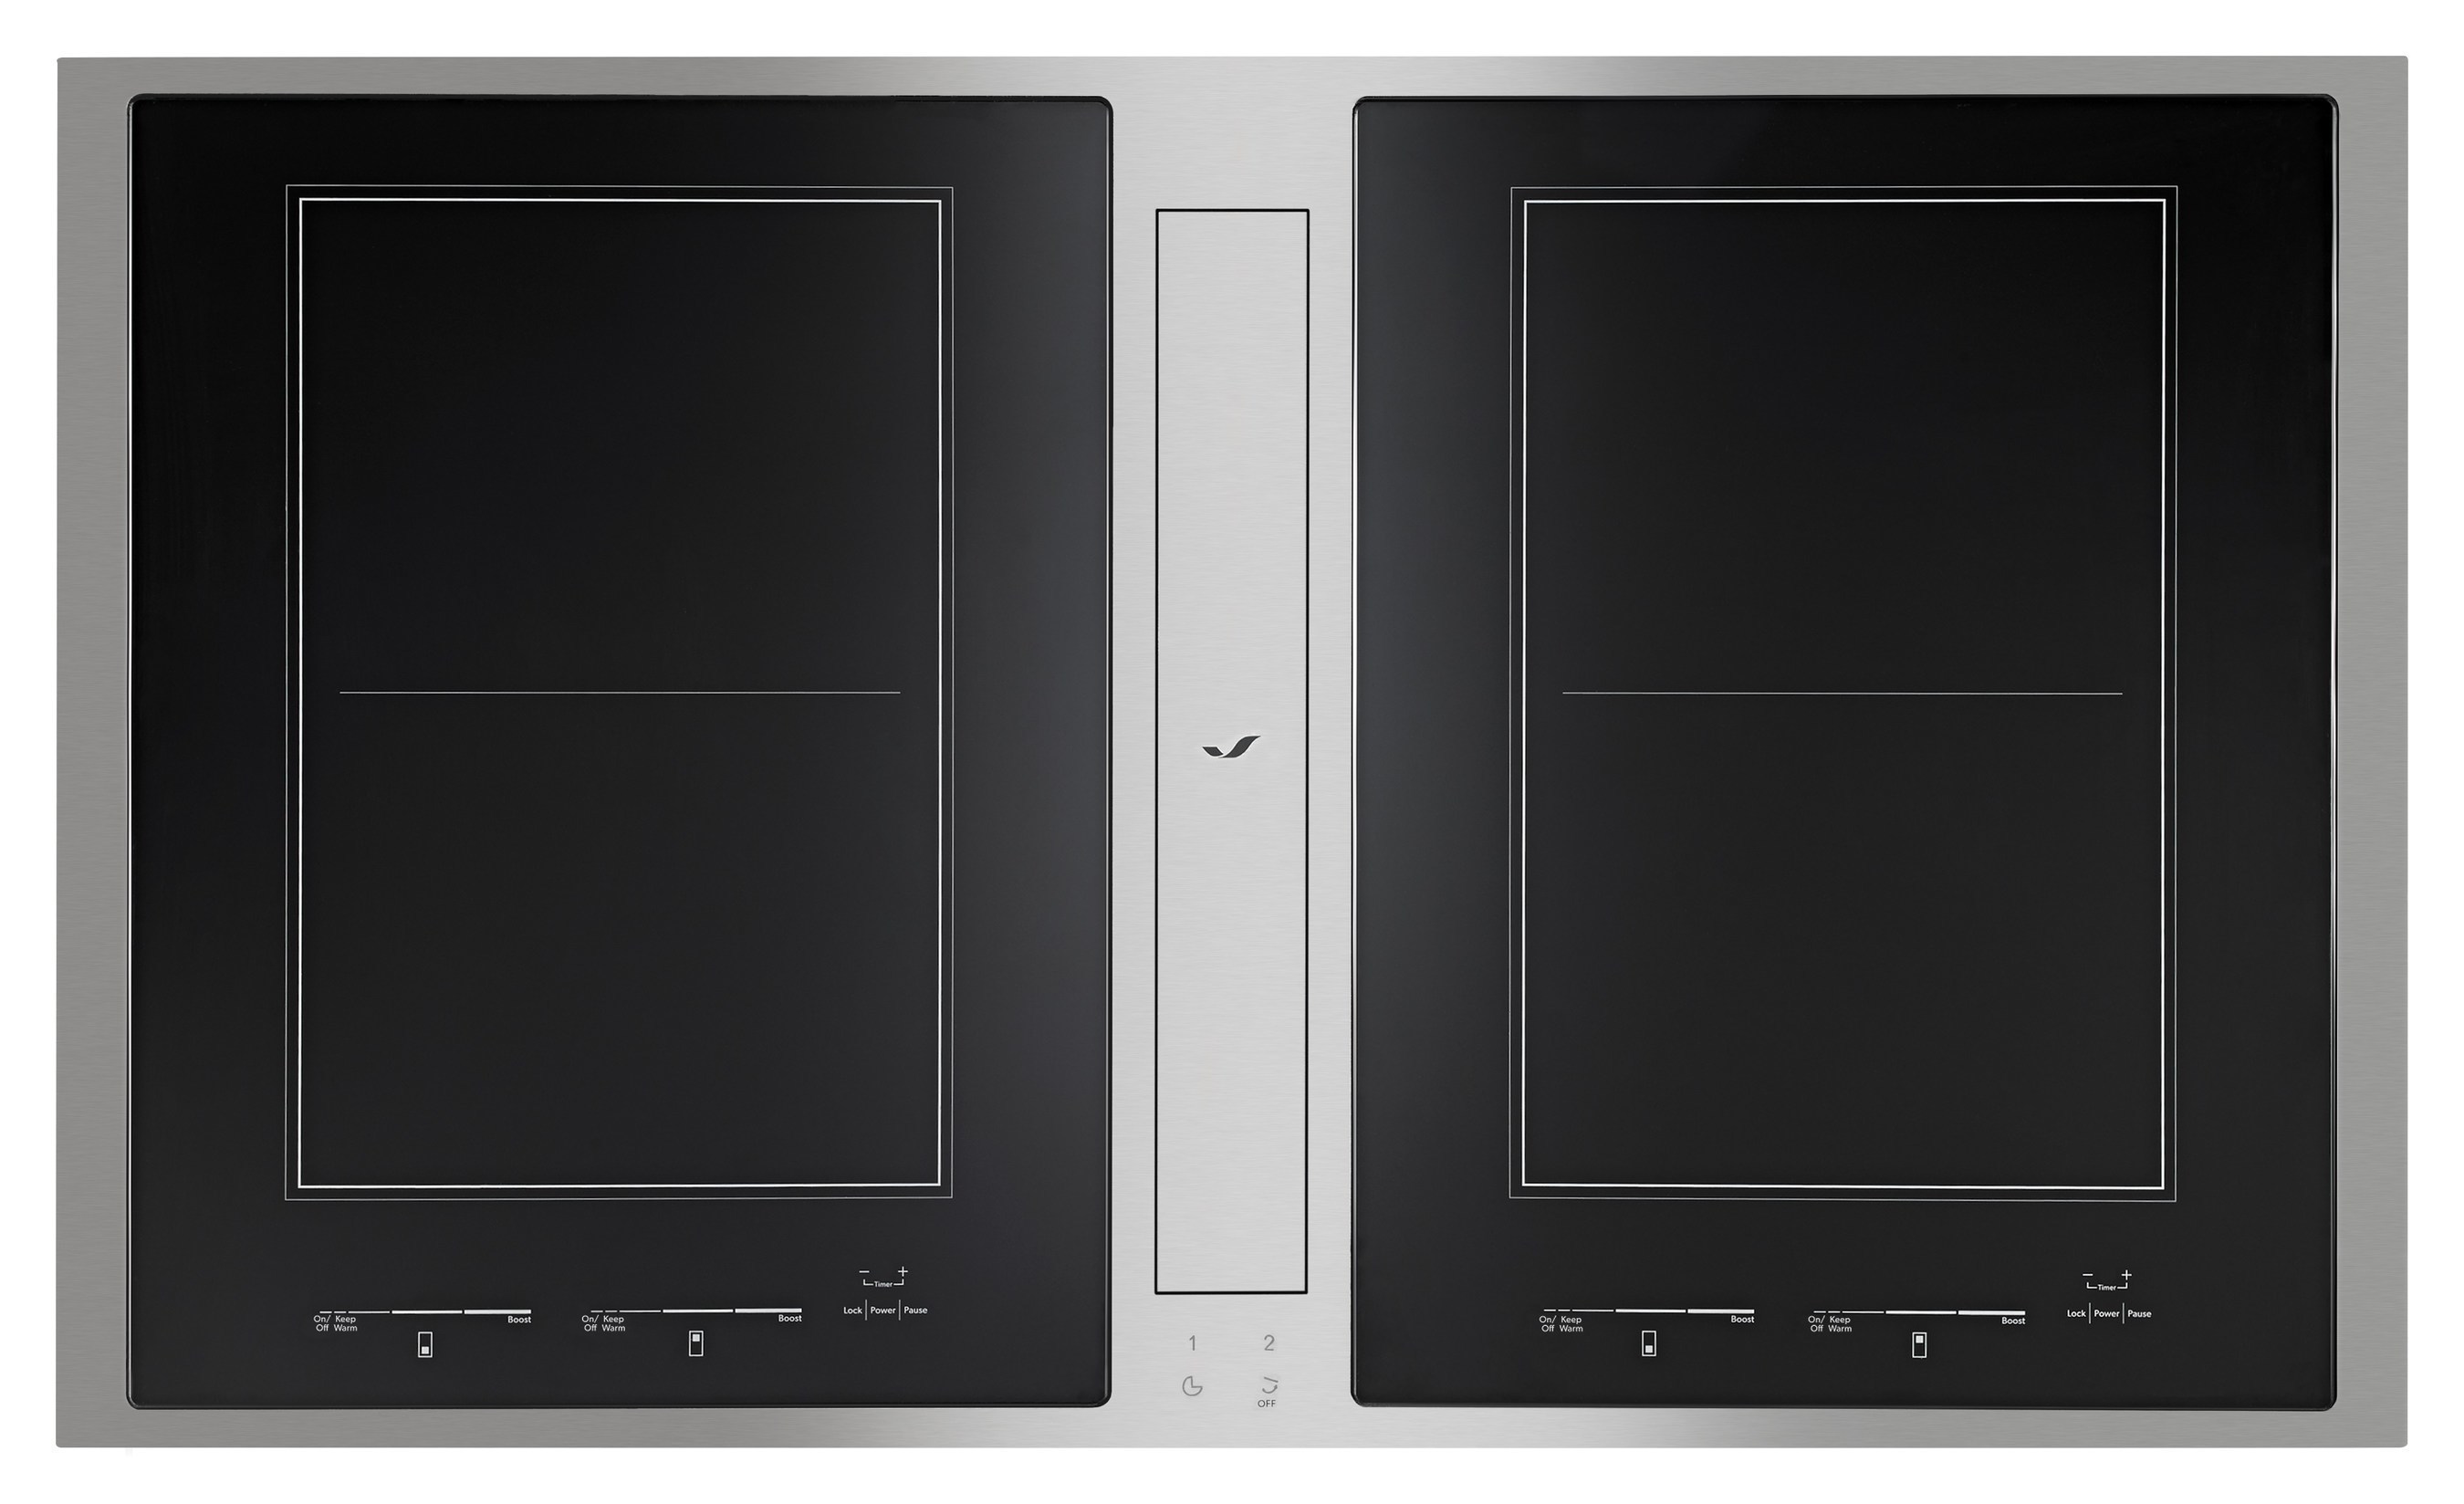 First Induction Downdraft Cooktop from Jenn-Air